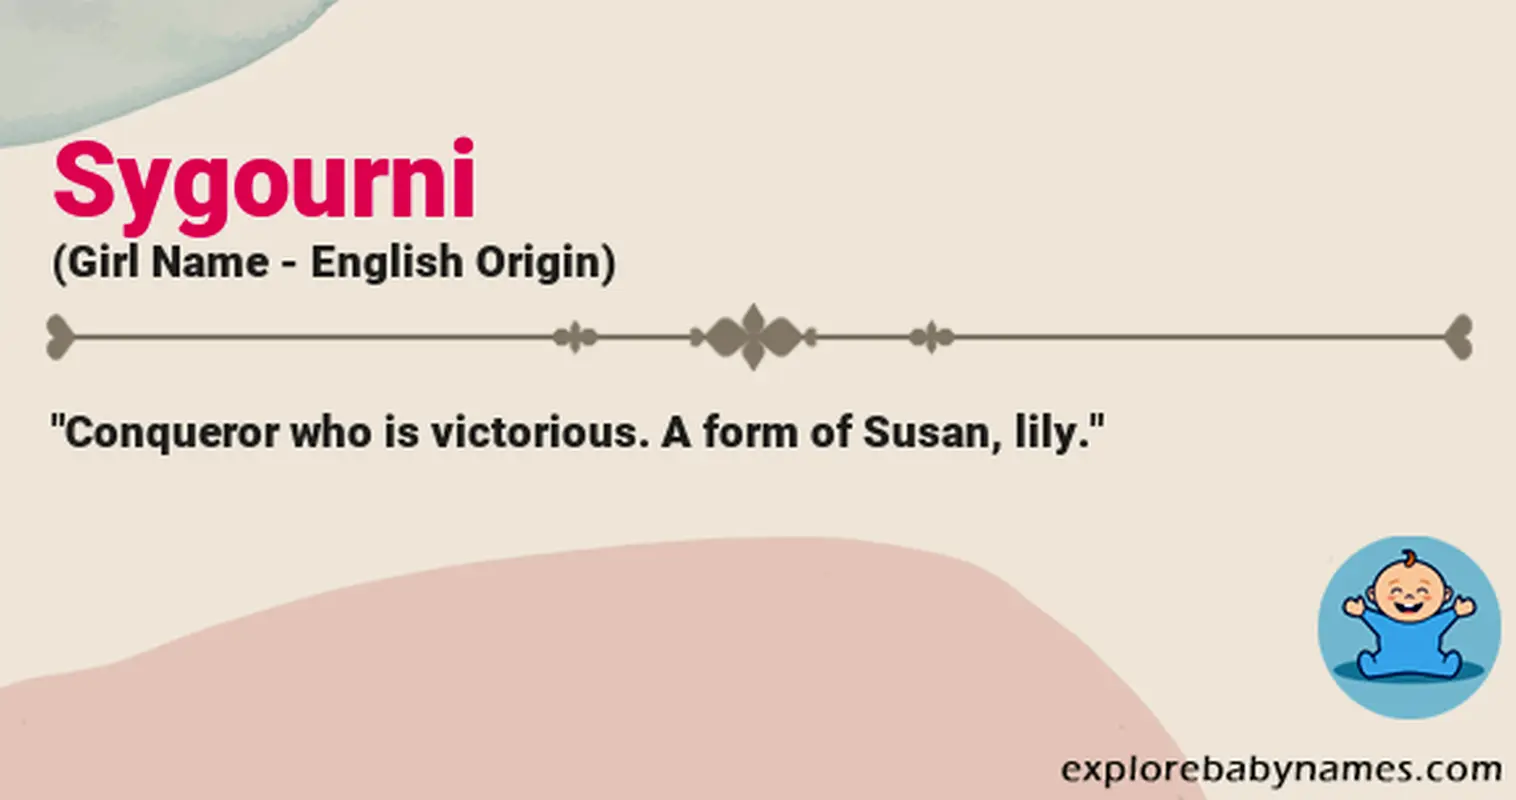 Meaning of Sygourni